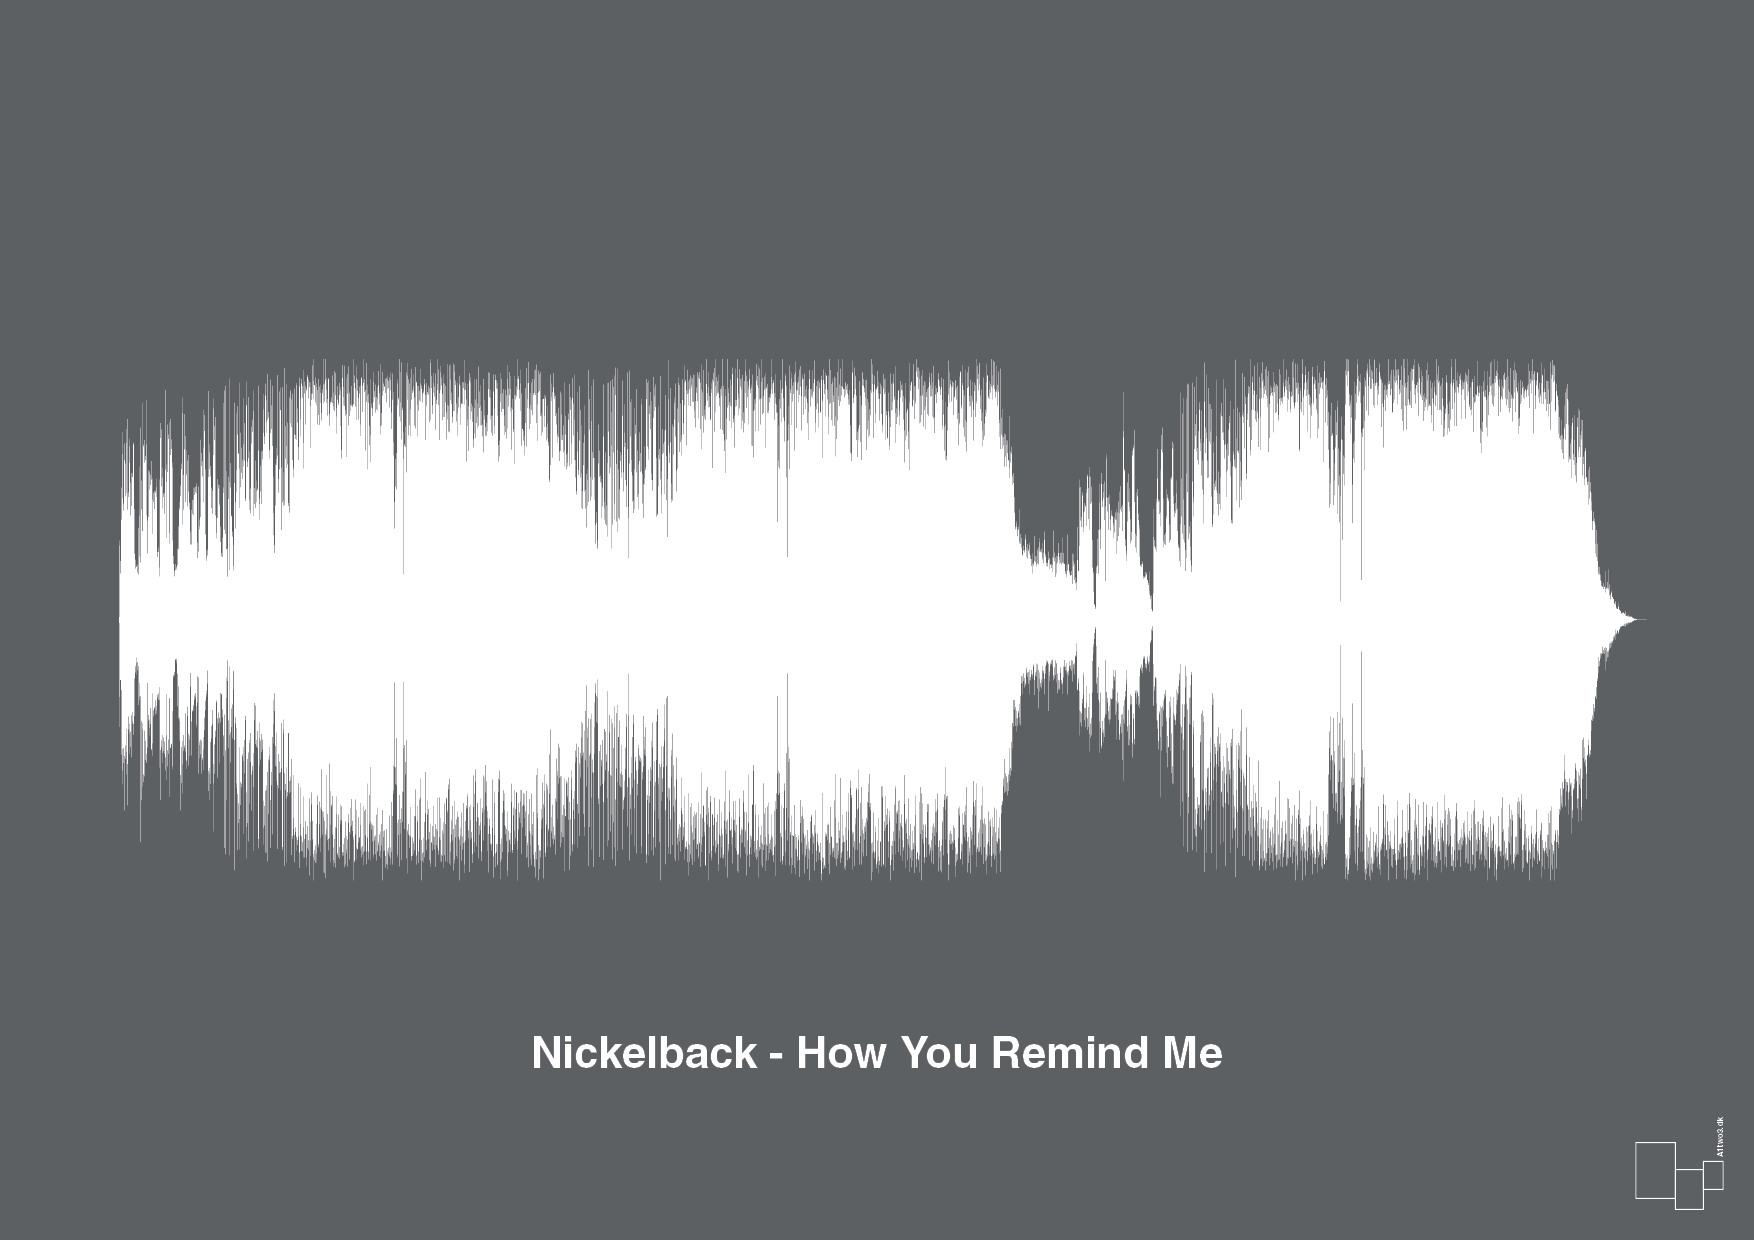 nickelback - how you remind me - Plakat med Musik i Graphic Charcoal